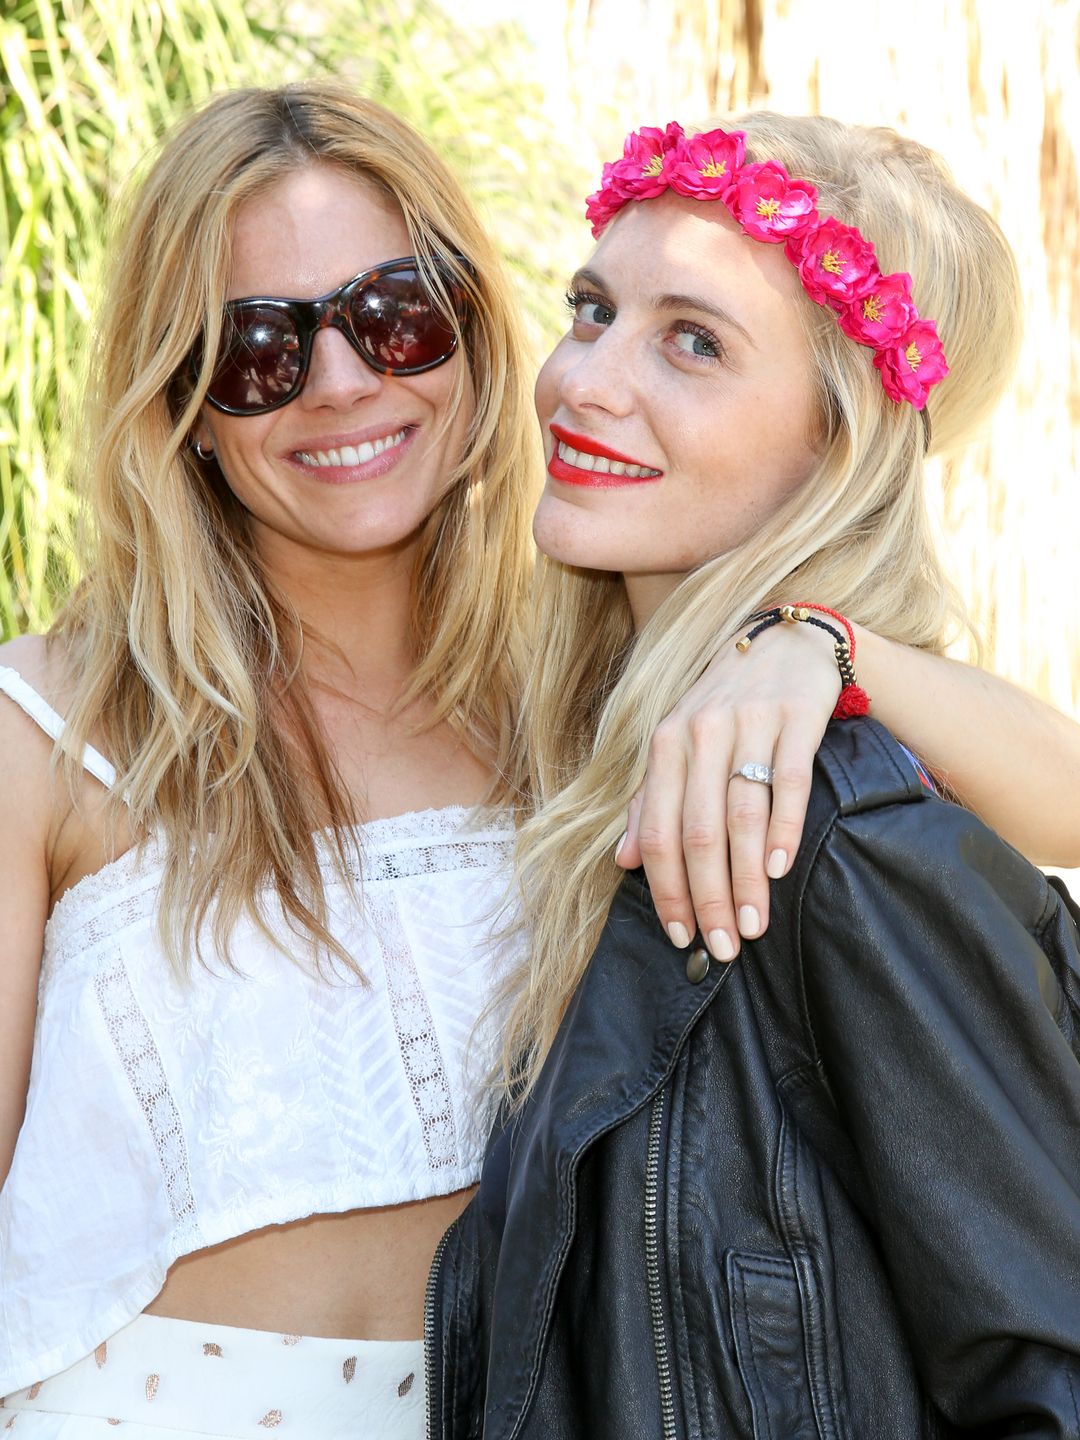 Actress Sienna Miller (L) and model Poppy Delevingne attend the Superdry Coachella brunch hosted by Poppy Delevingne 